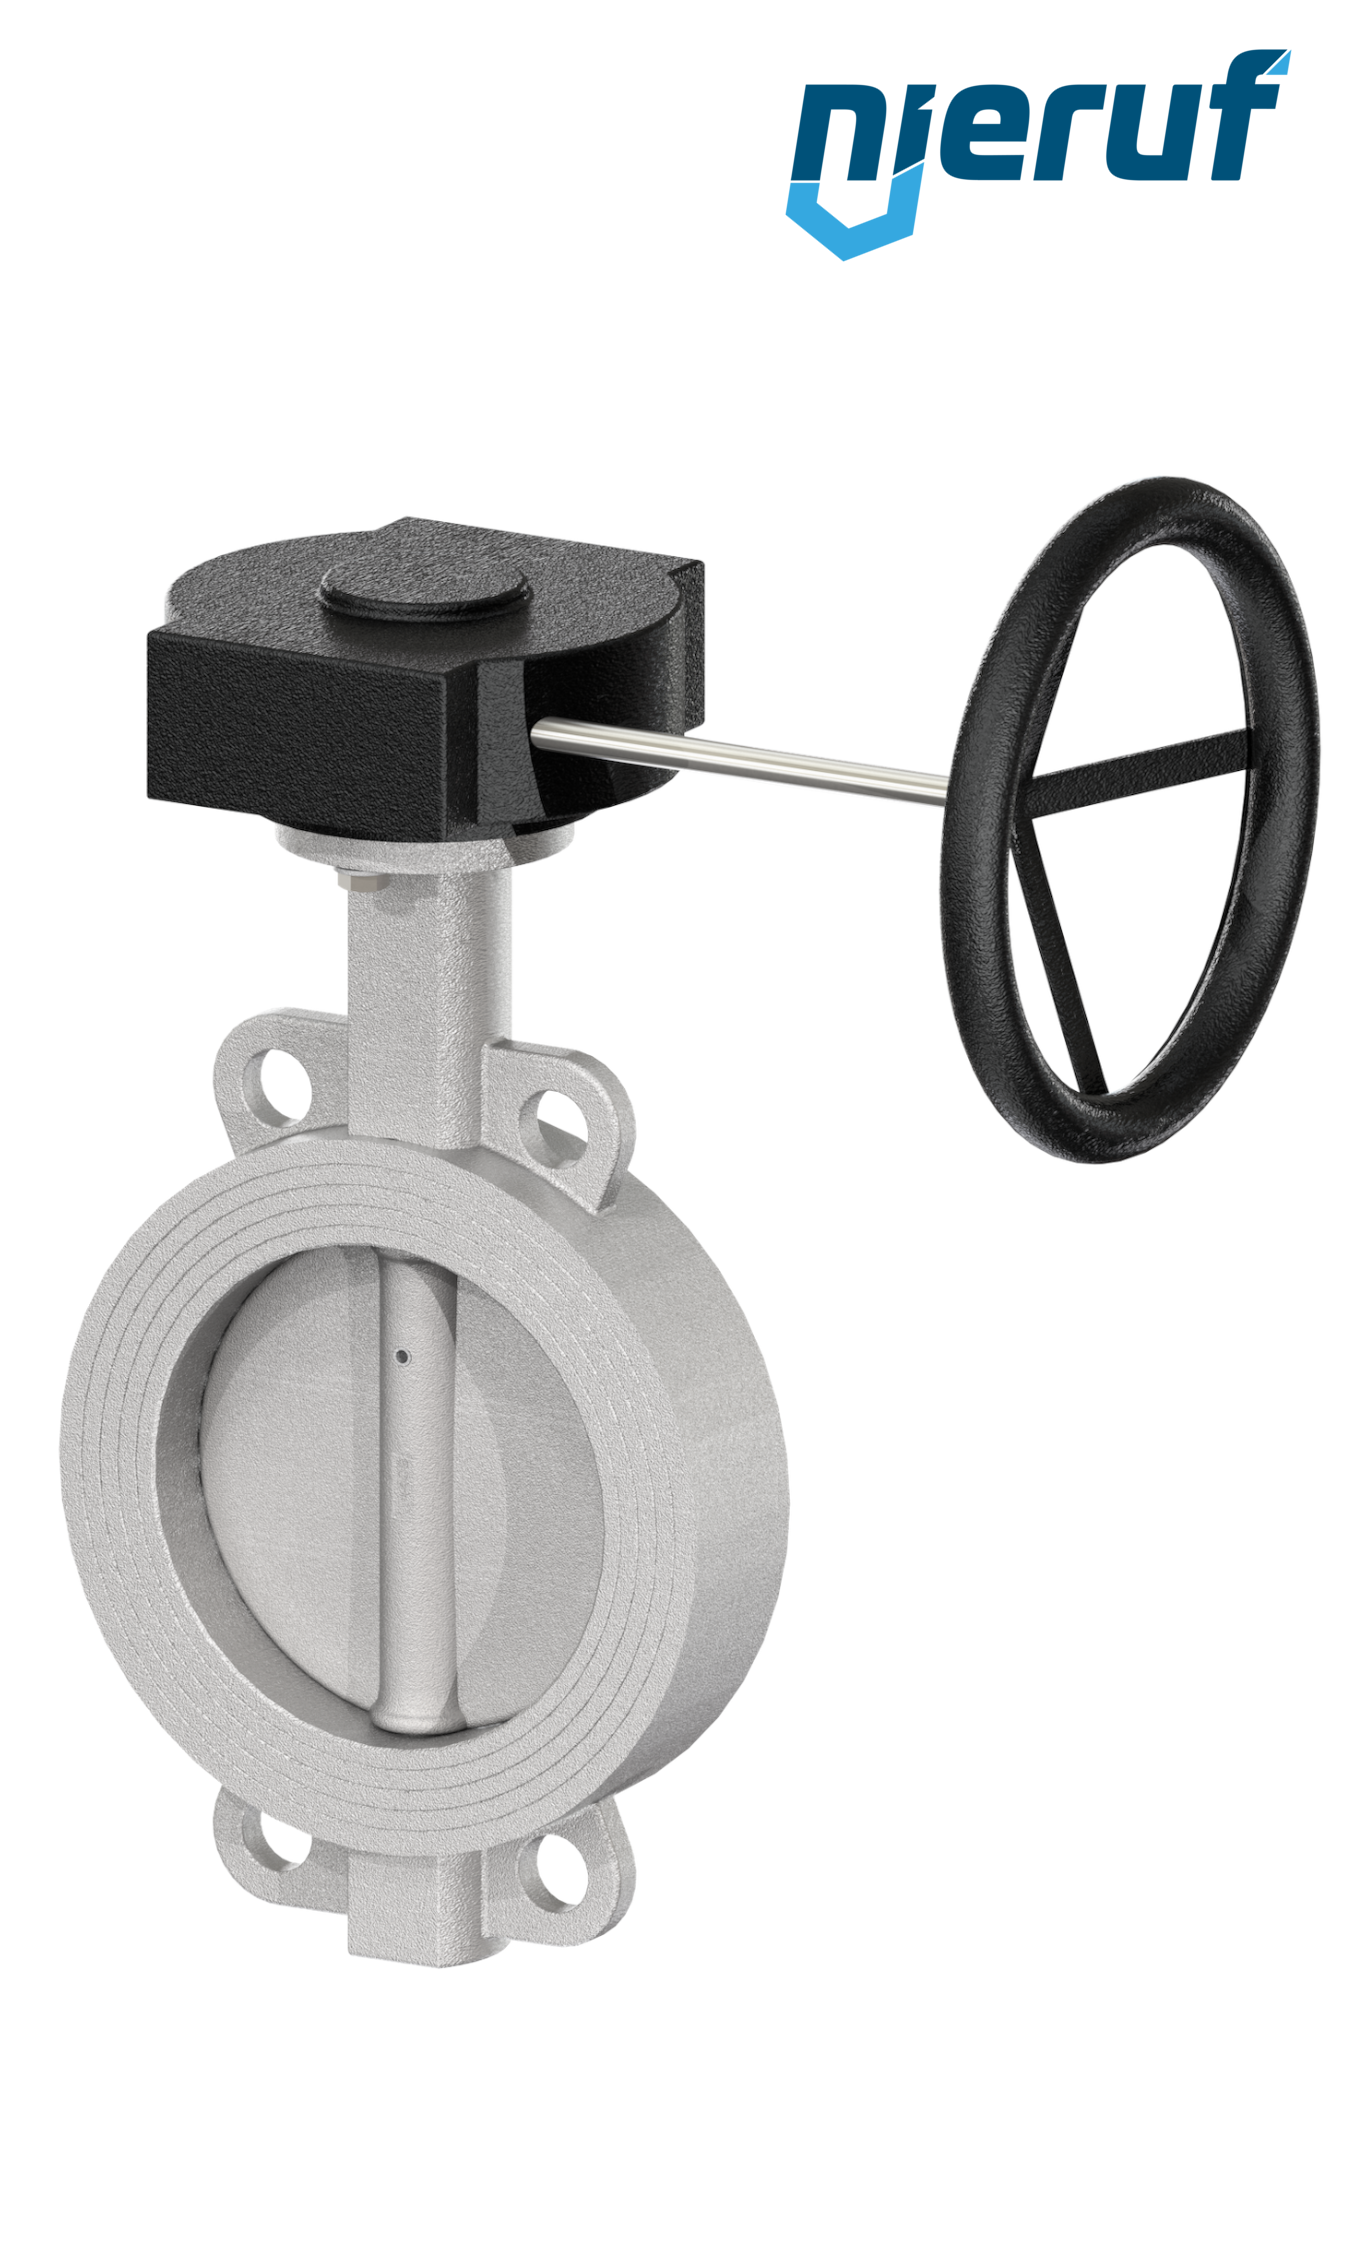 Butterfly-valve-stainless-steel DN 150 PN16 AK08 metall gearbox